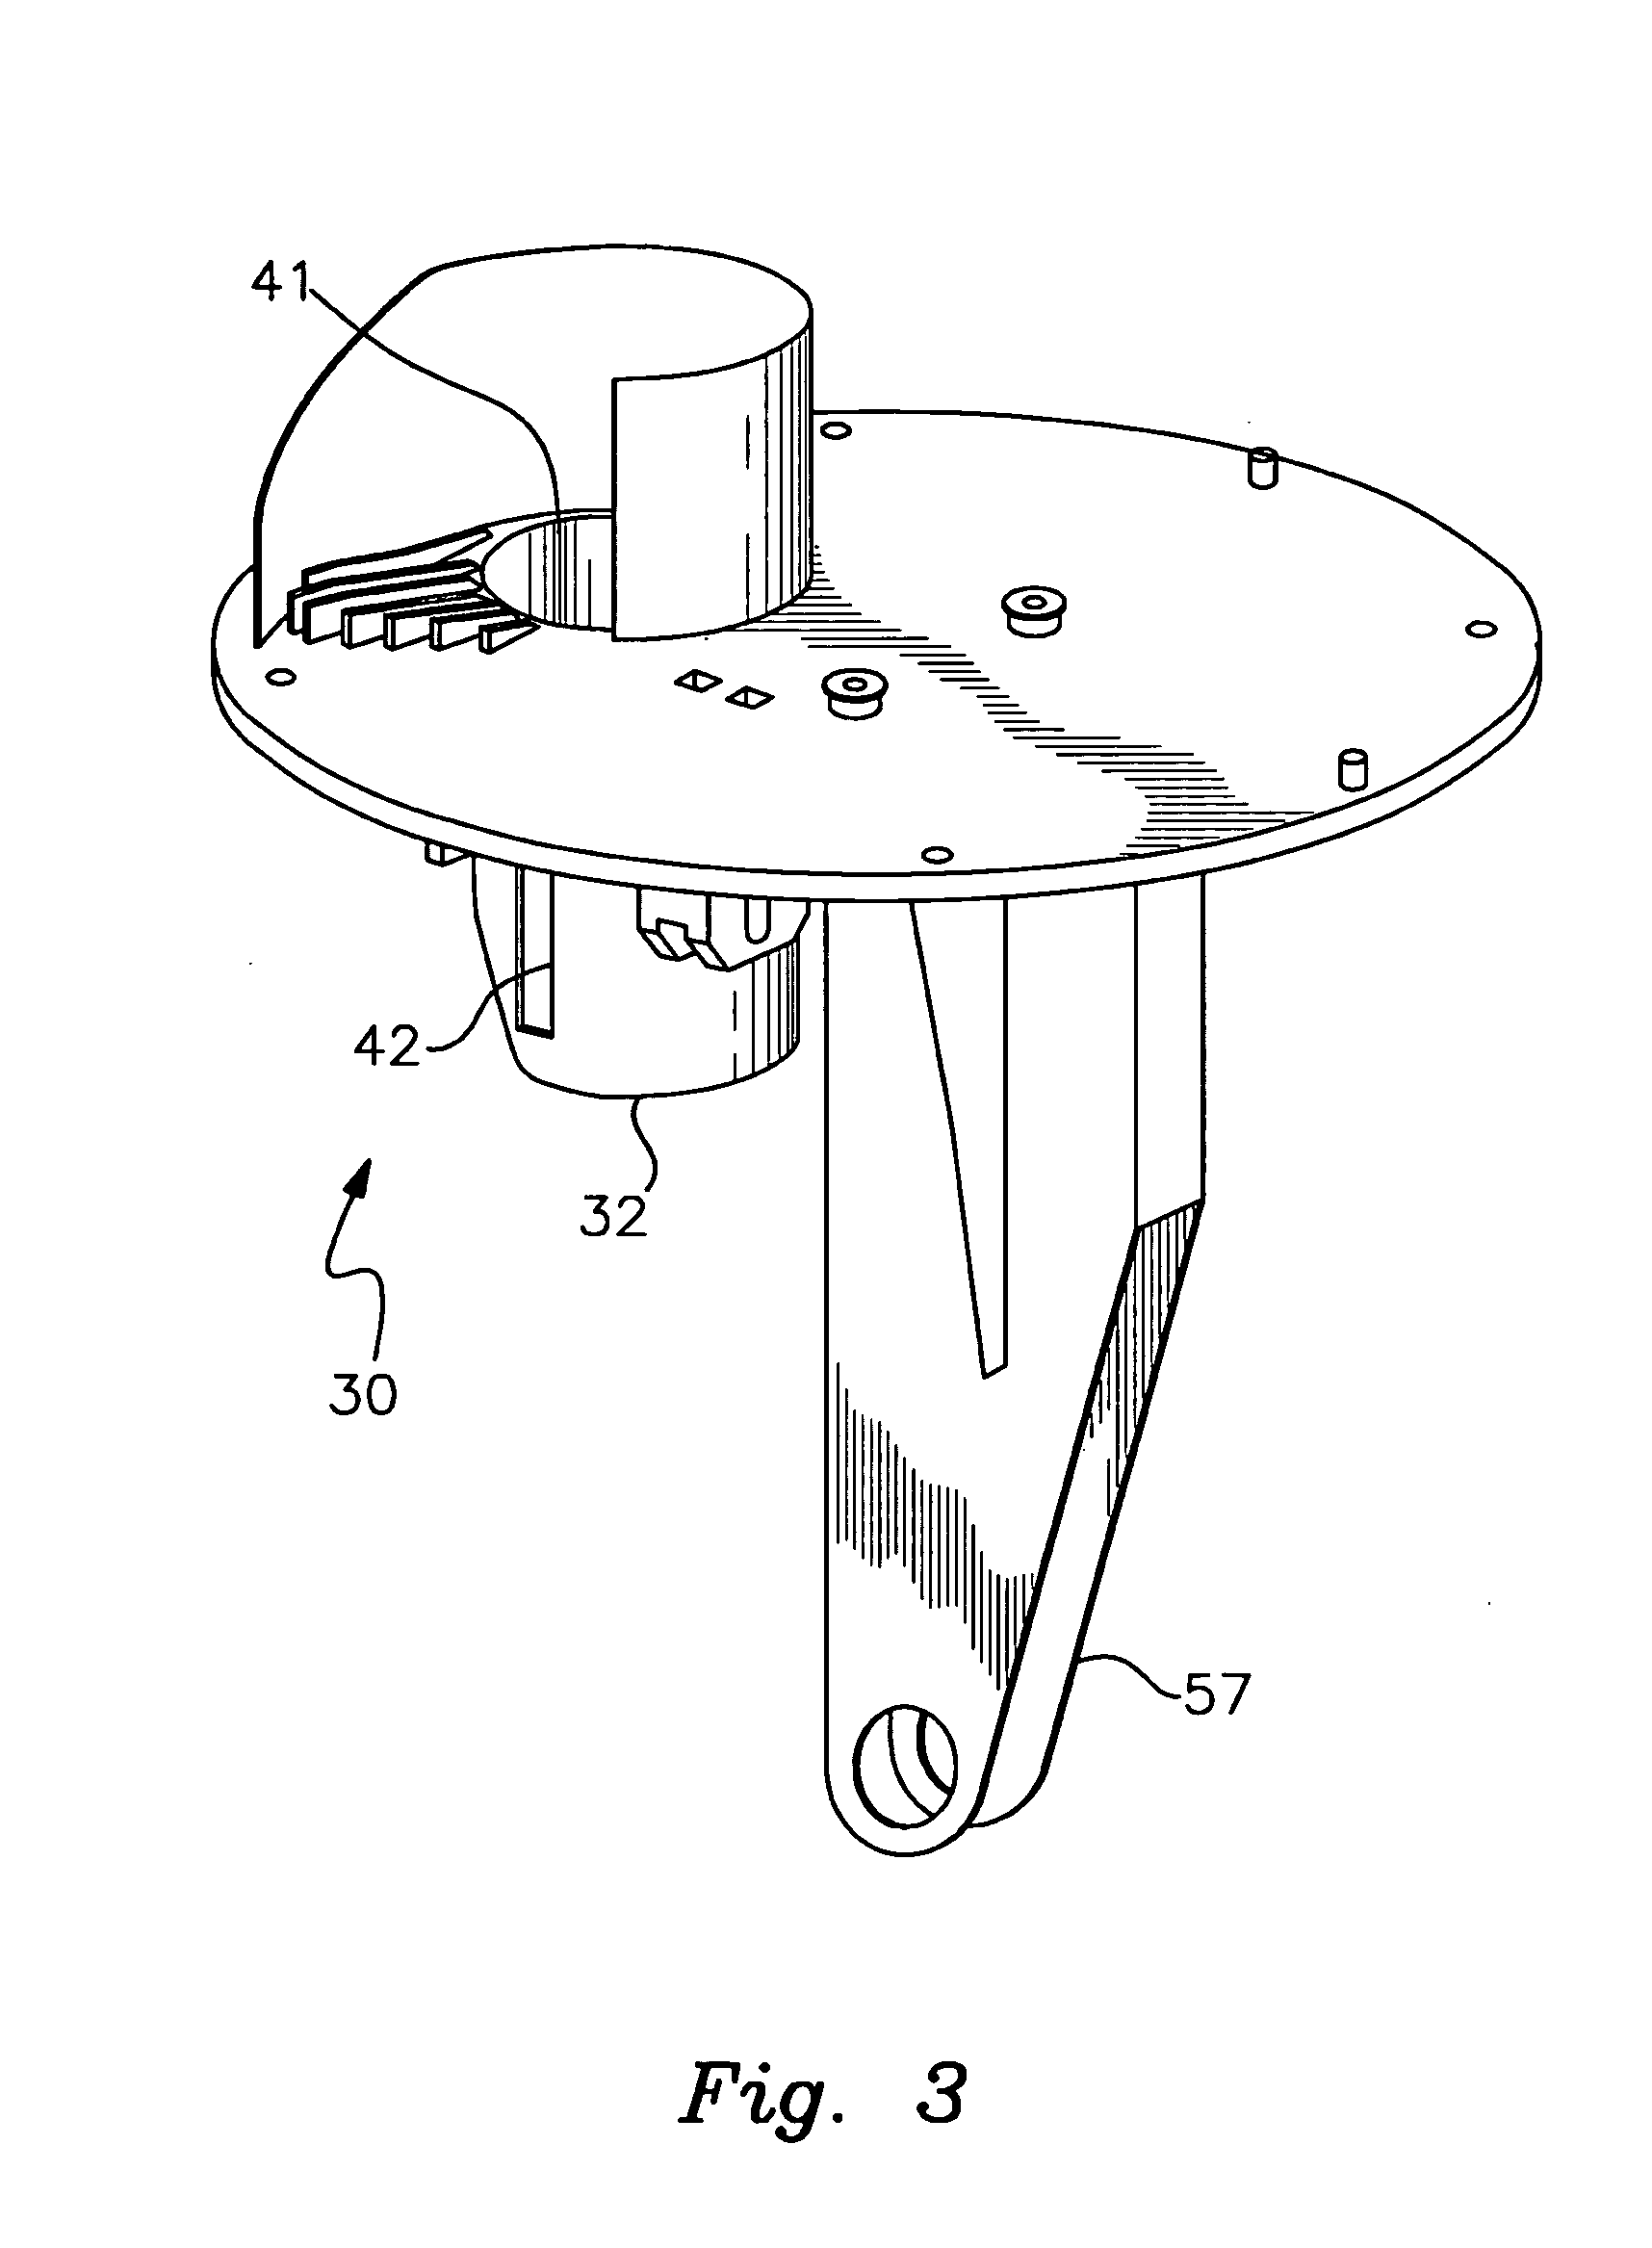 Golf ball dispensing and teeing device